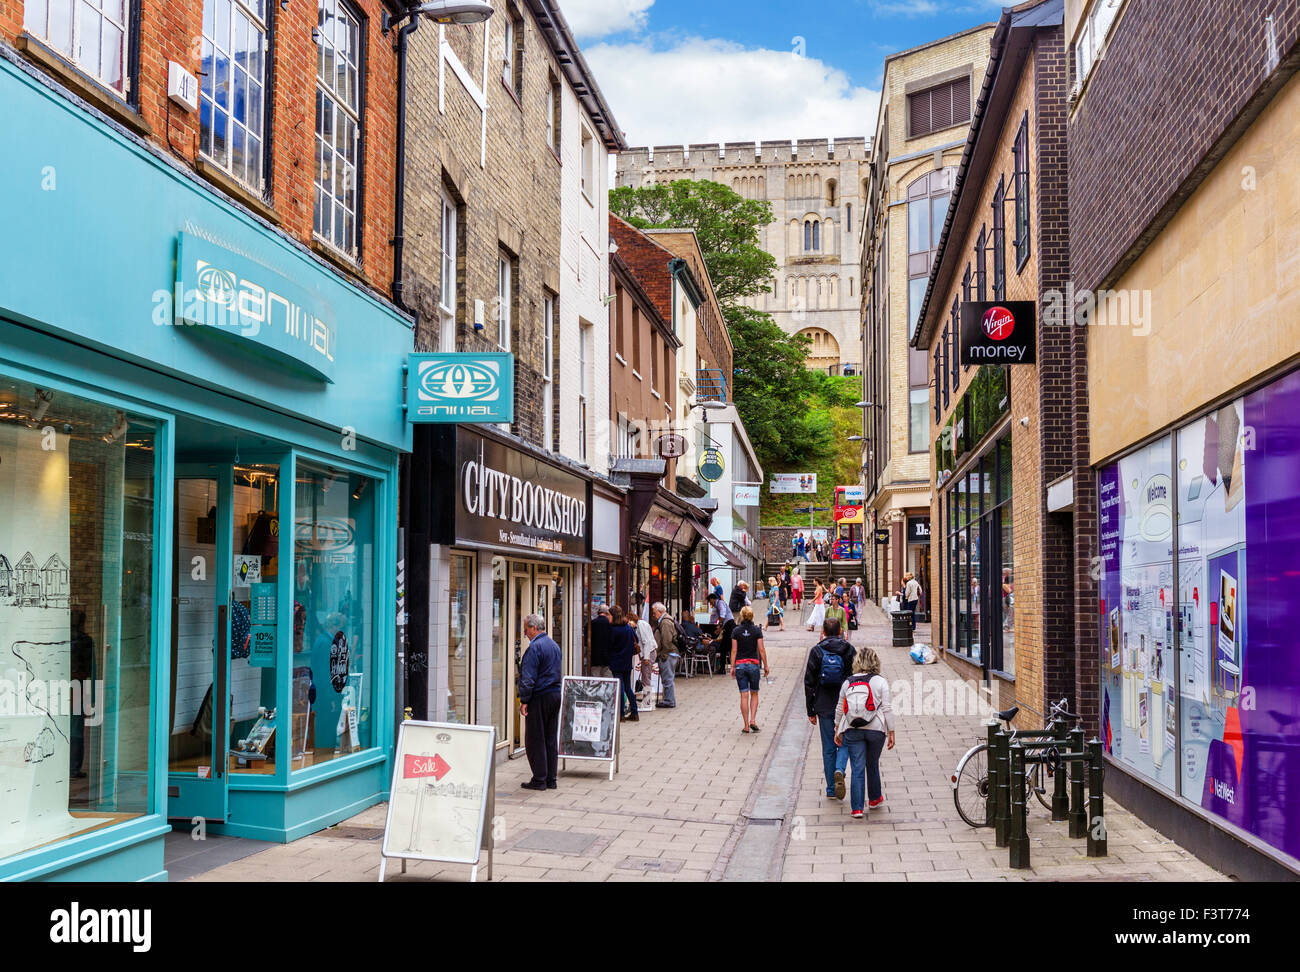 Shops on Davey Place in the city centre looking towards the castle, Norwich, Norfolk, England, UK Stock Photo